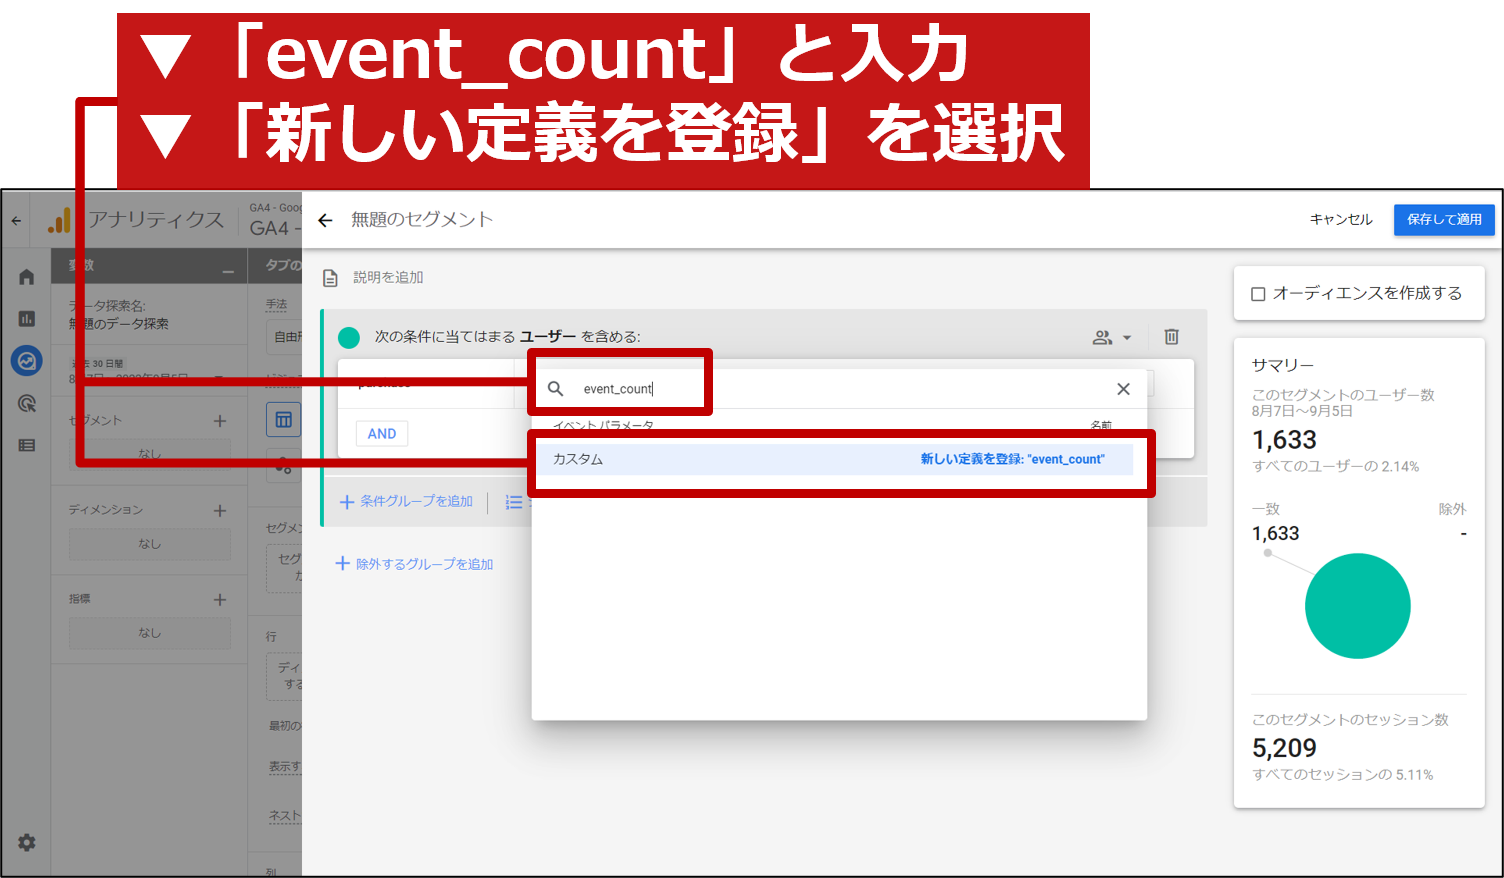 「event_count」と入力